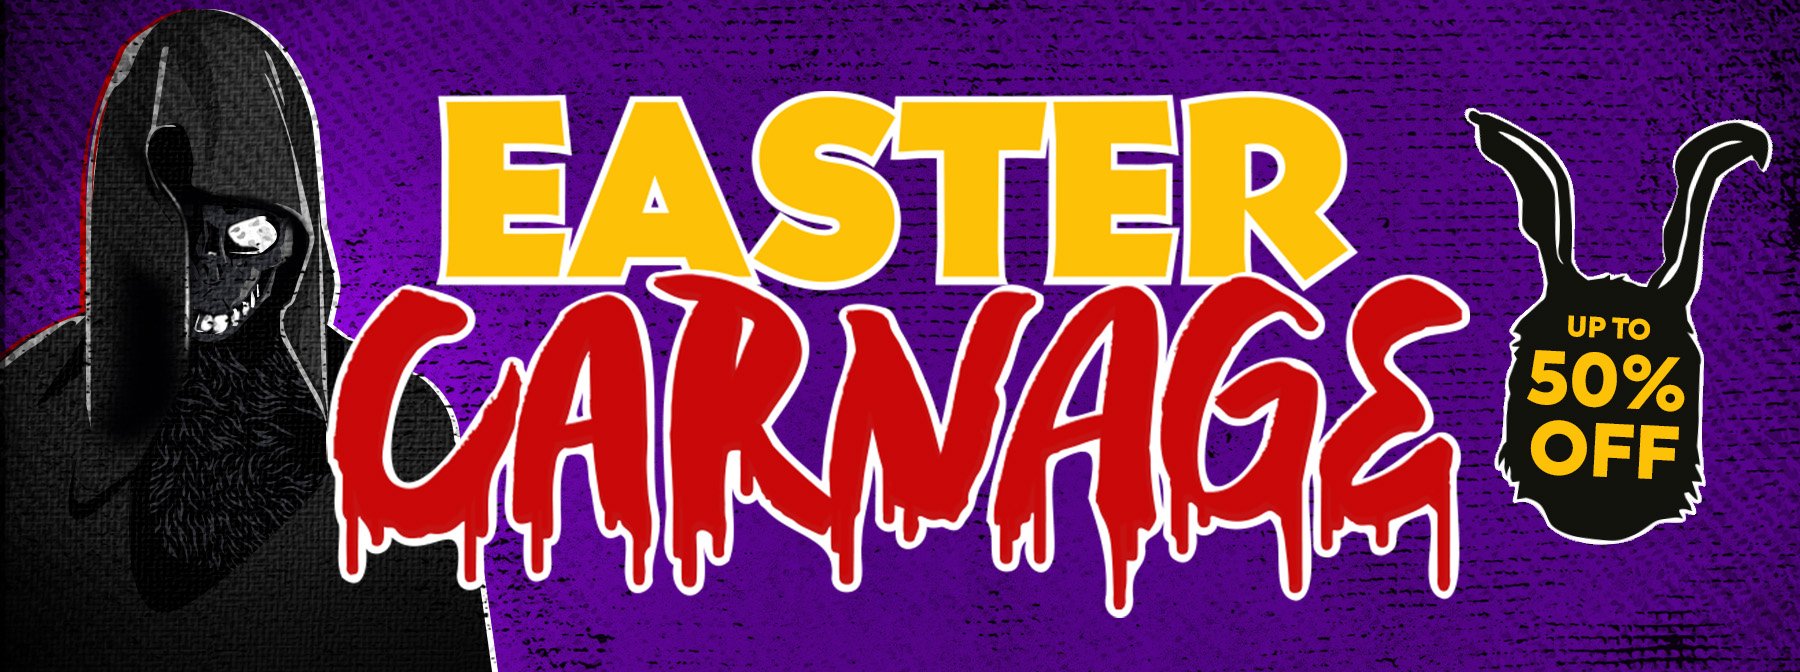 Our Top Picks for Easter Carnage